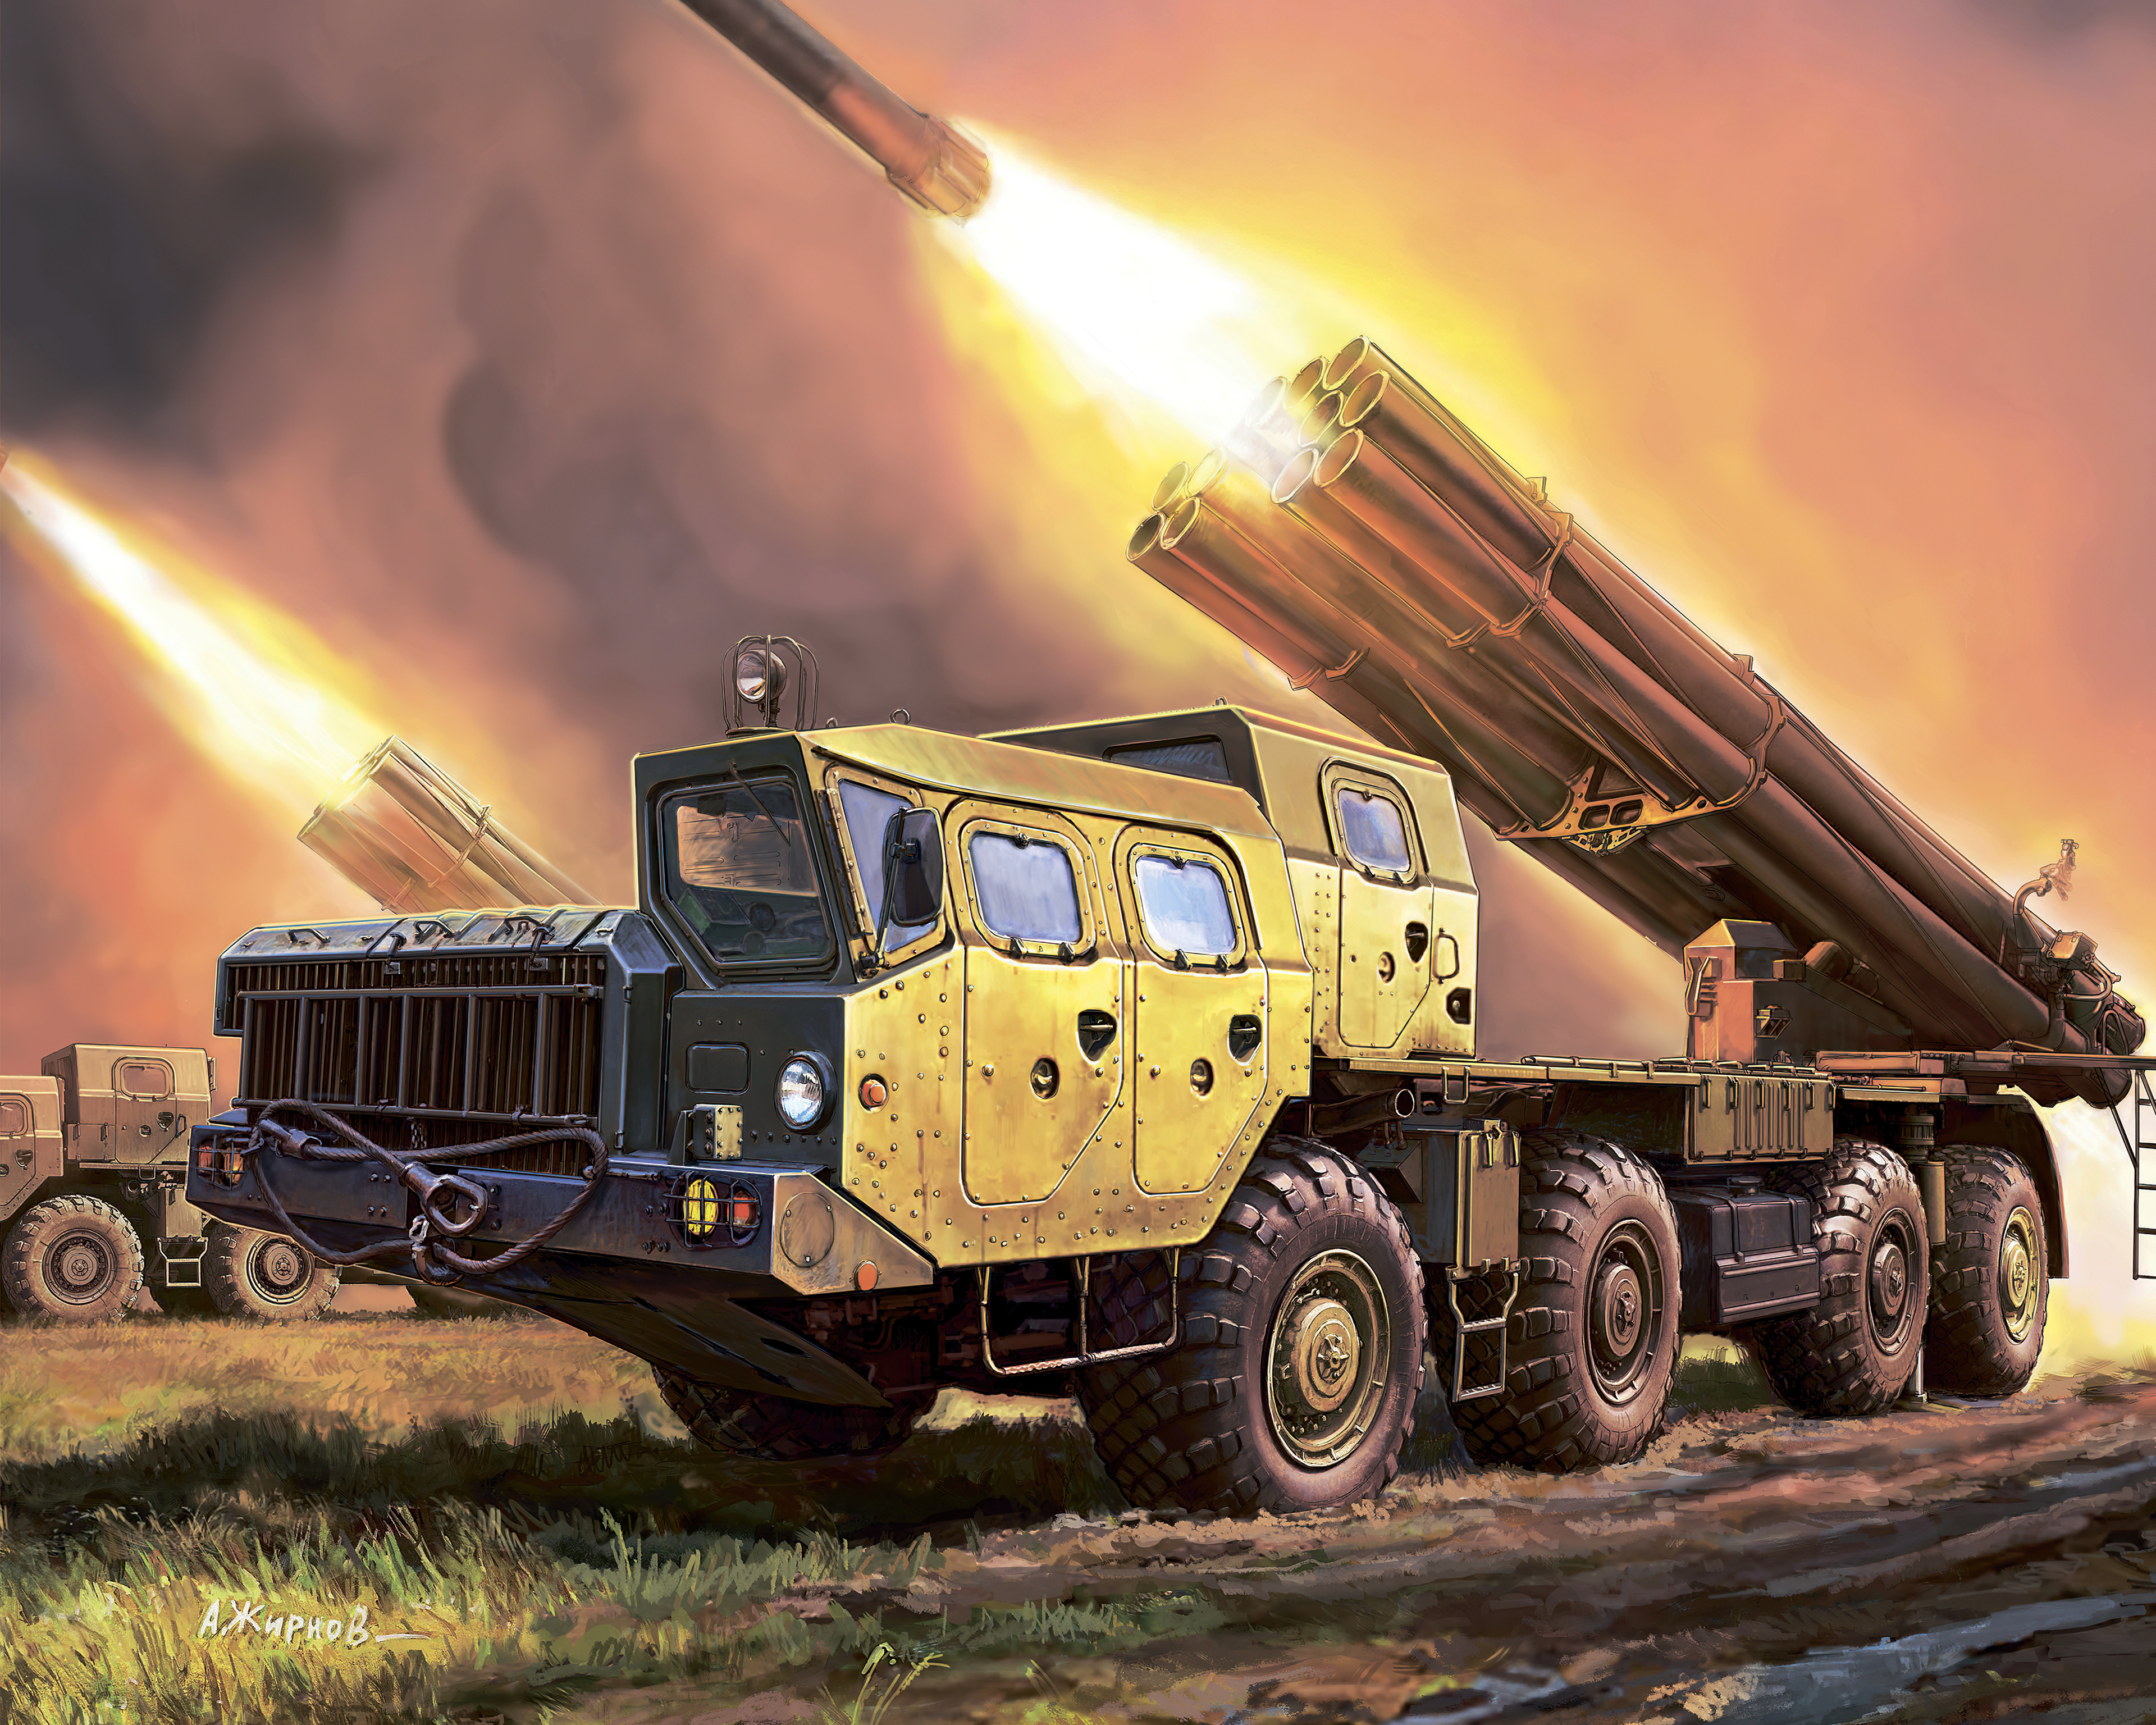 General 3840x3072 car army military military vehicle artwork missiles frontal view grass 9K58 Smerch